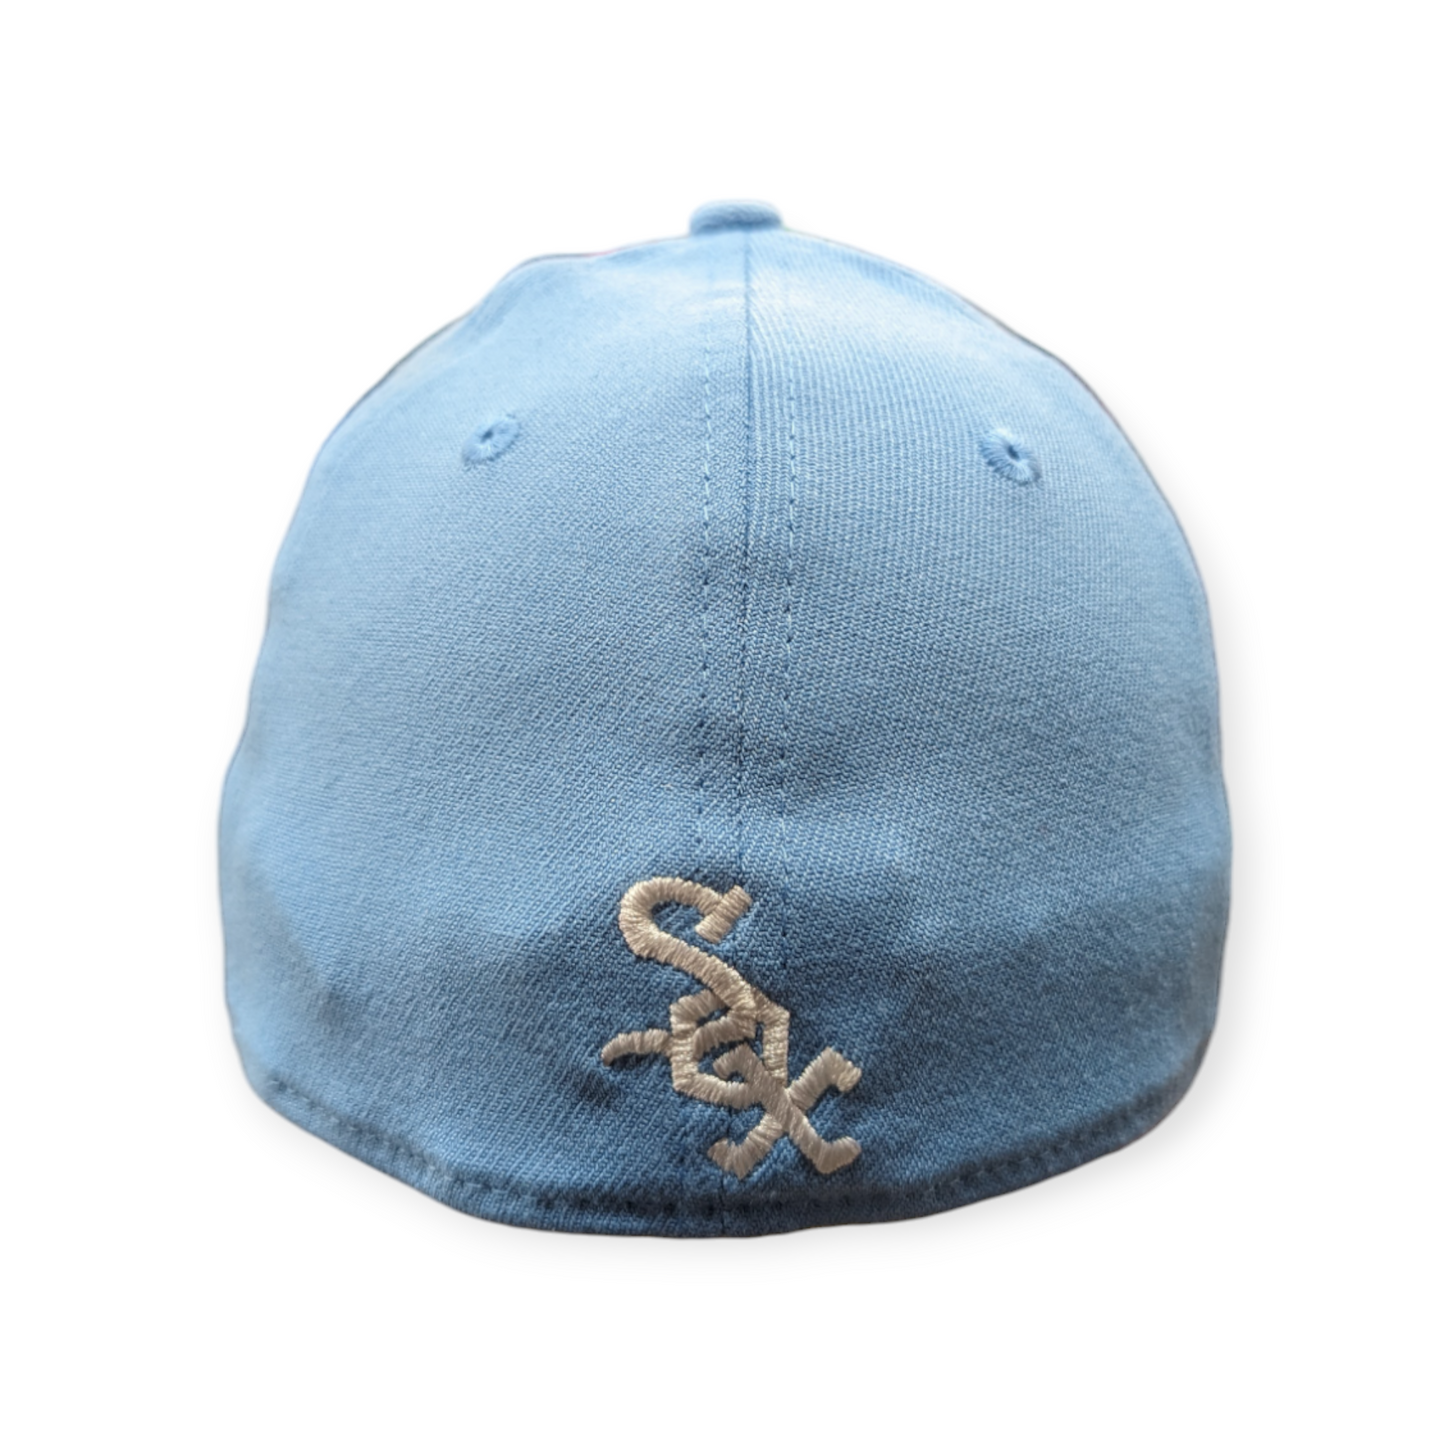 Chicago White Sox 1969-1972 Cooperstown Sky Blue 39THIRTY Flex Fit New Era Hat